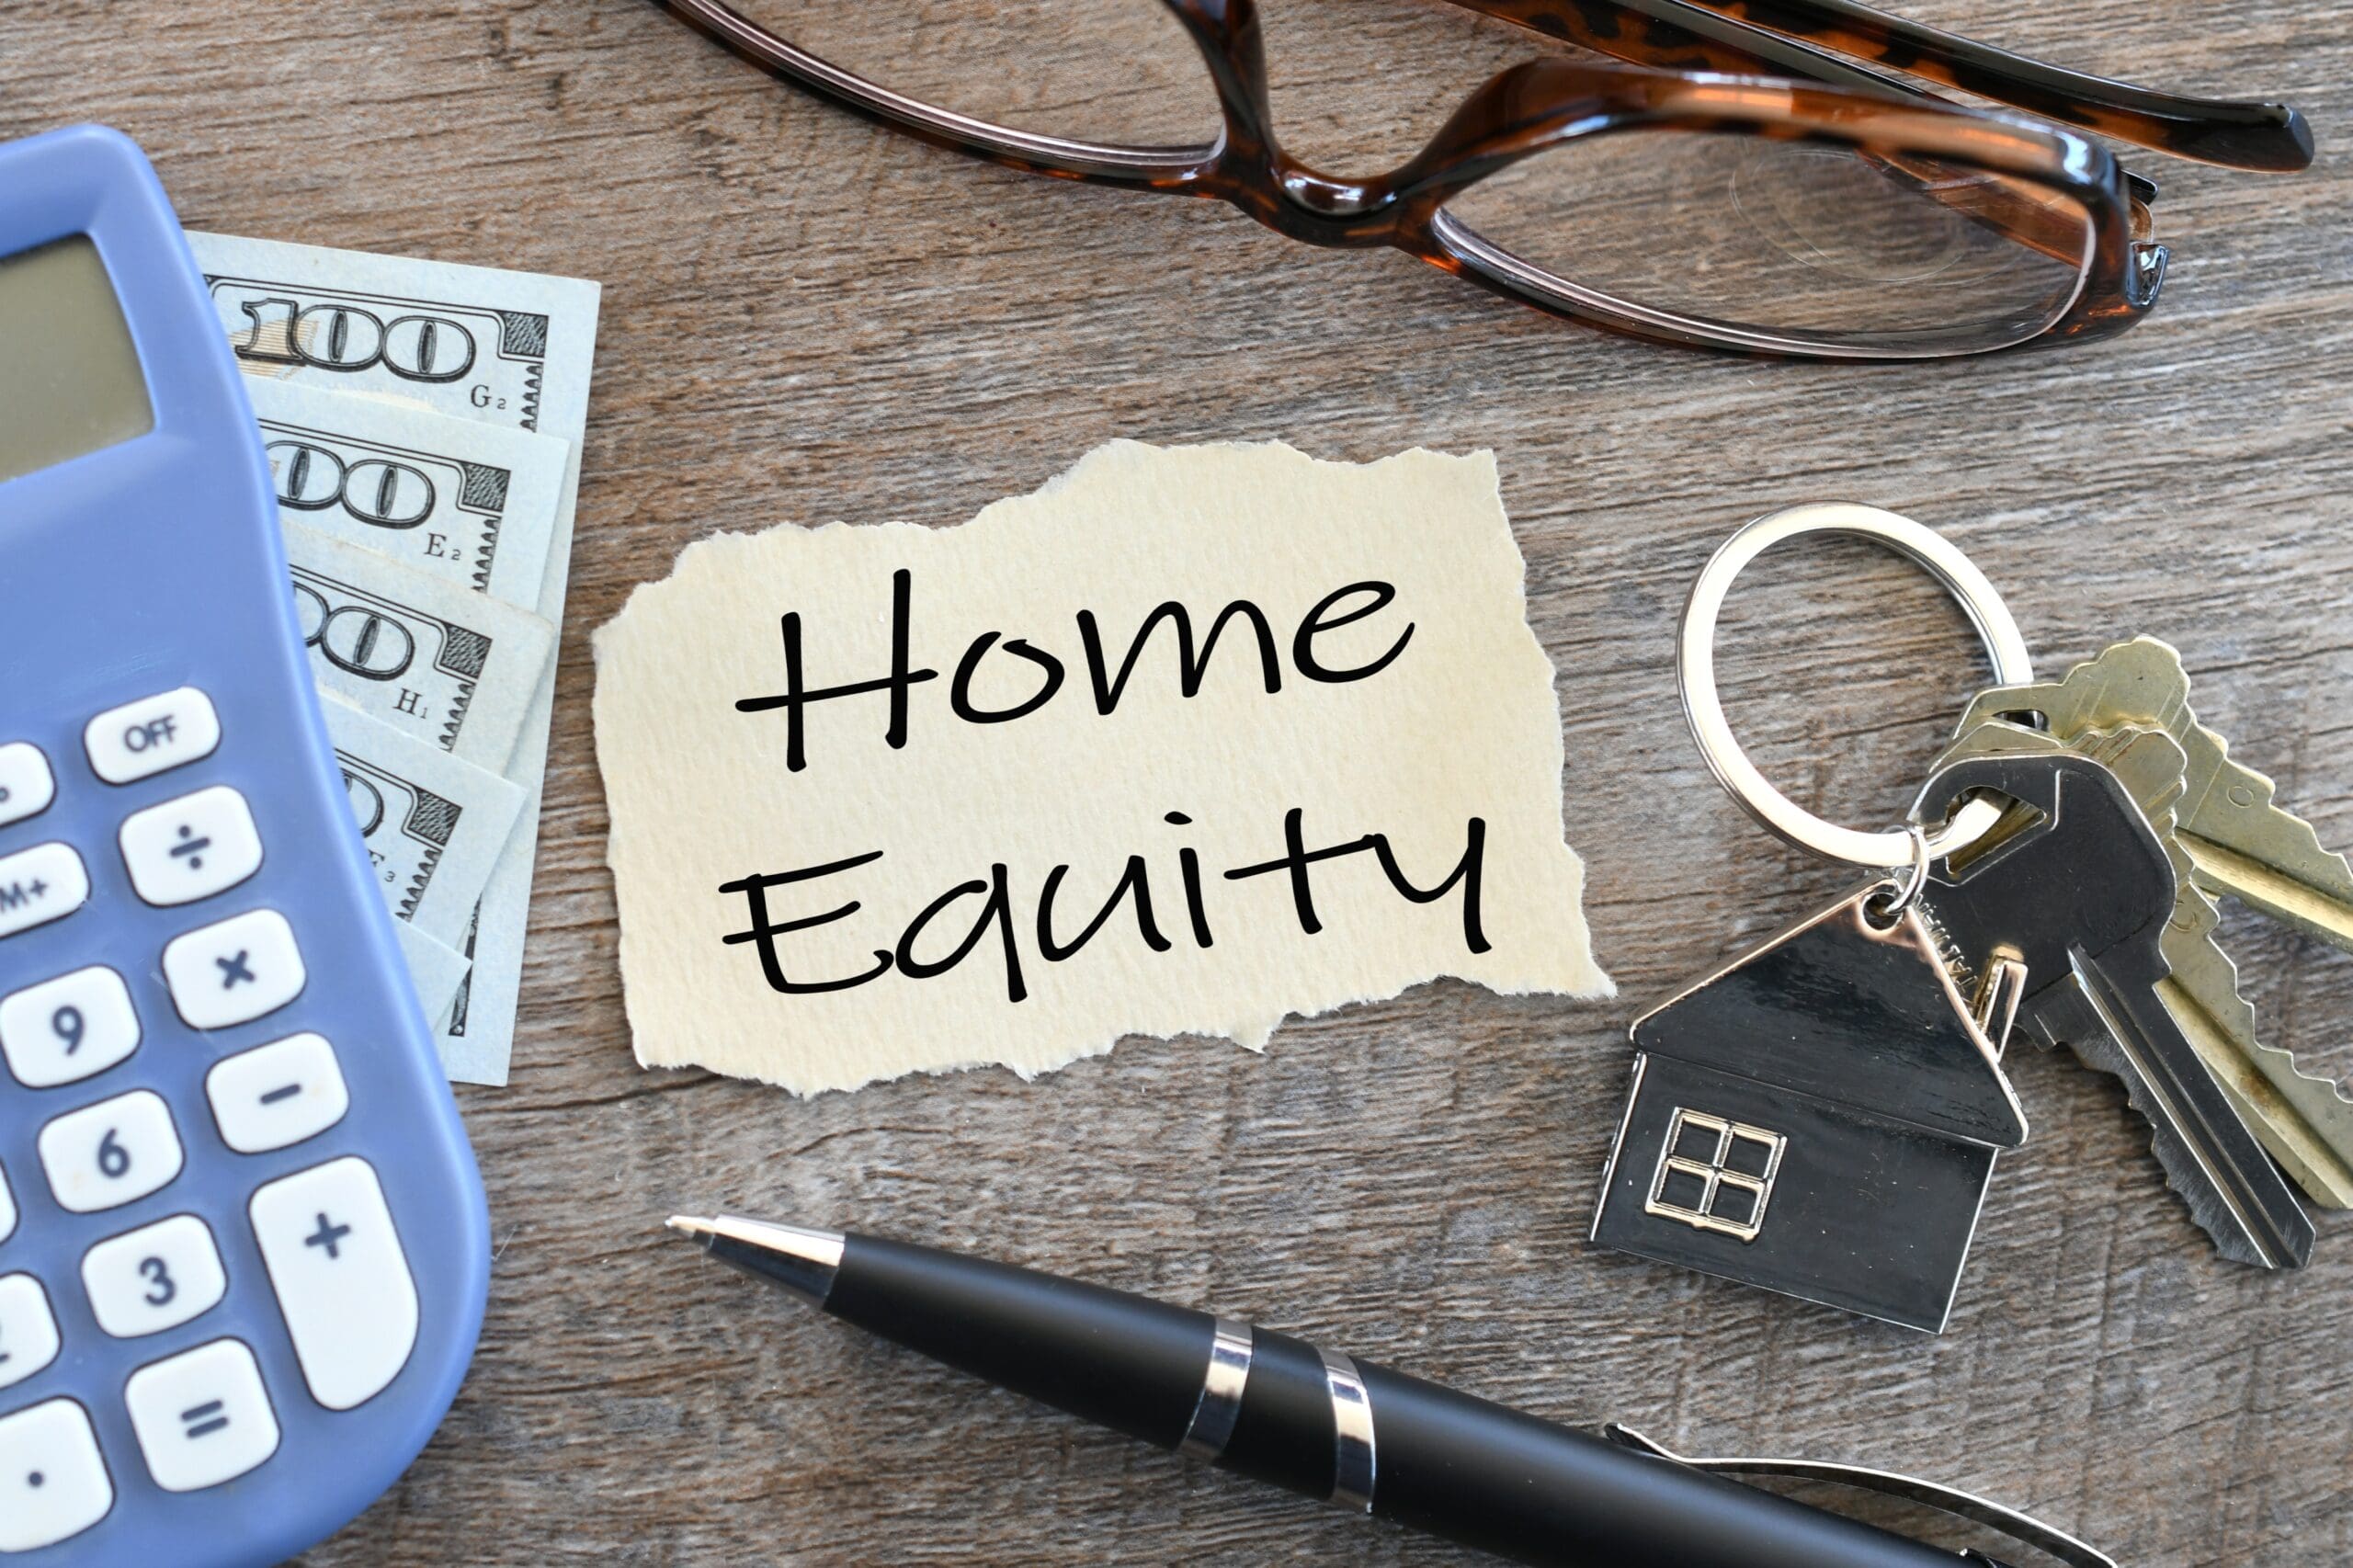 How to Maximize Home Equity: Building, Renovating, and Financing